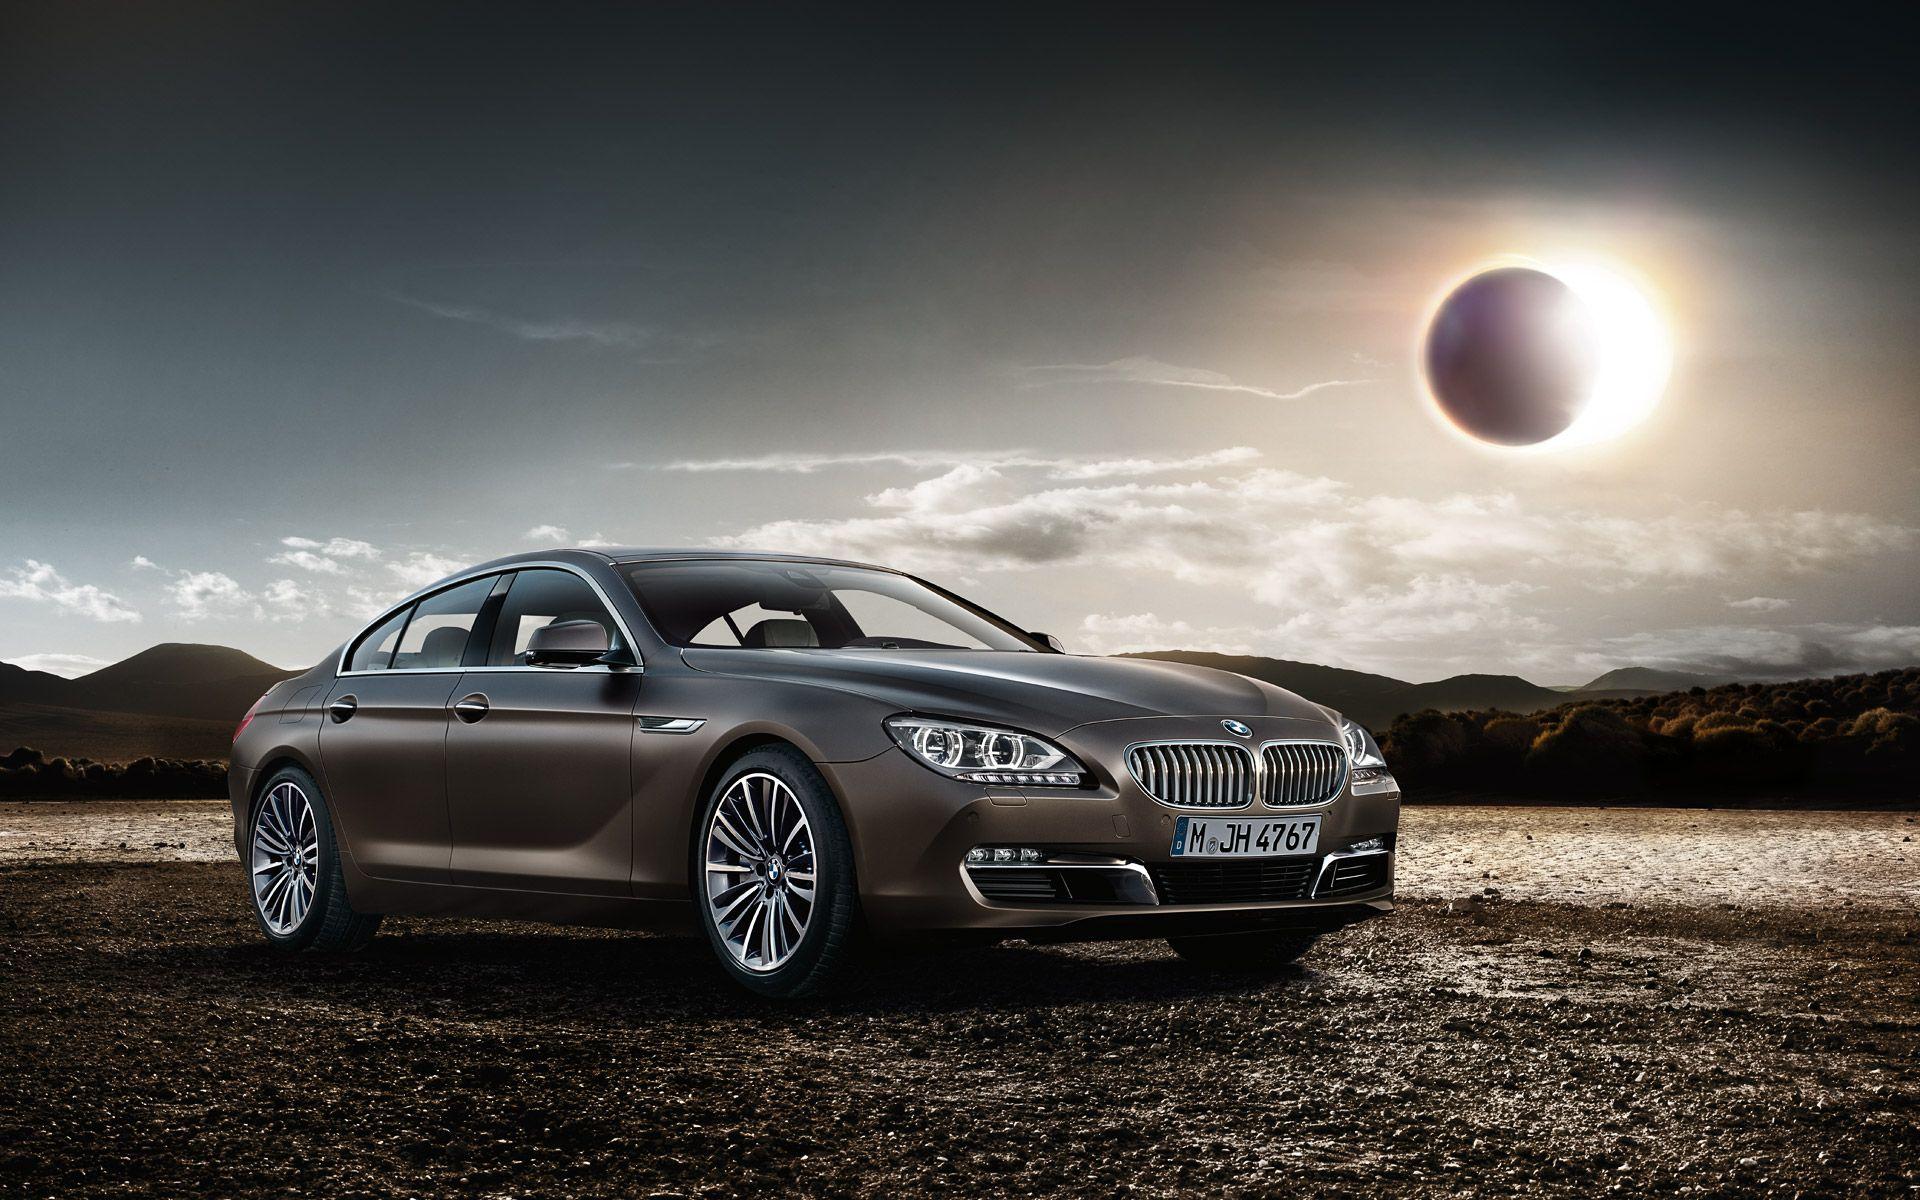 Bmw 6 Series Wallpapers Top Free Bmw 6 Series Backgrounds Wallpaperaccess